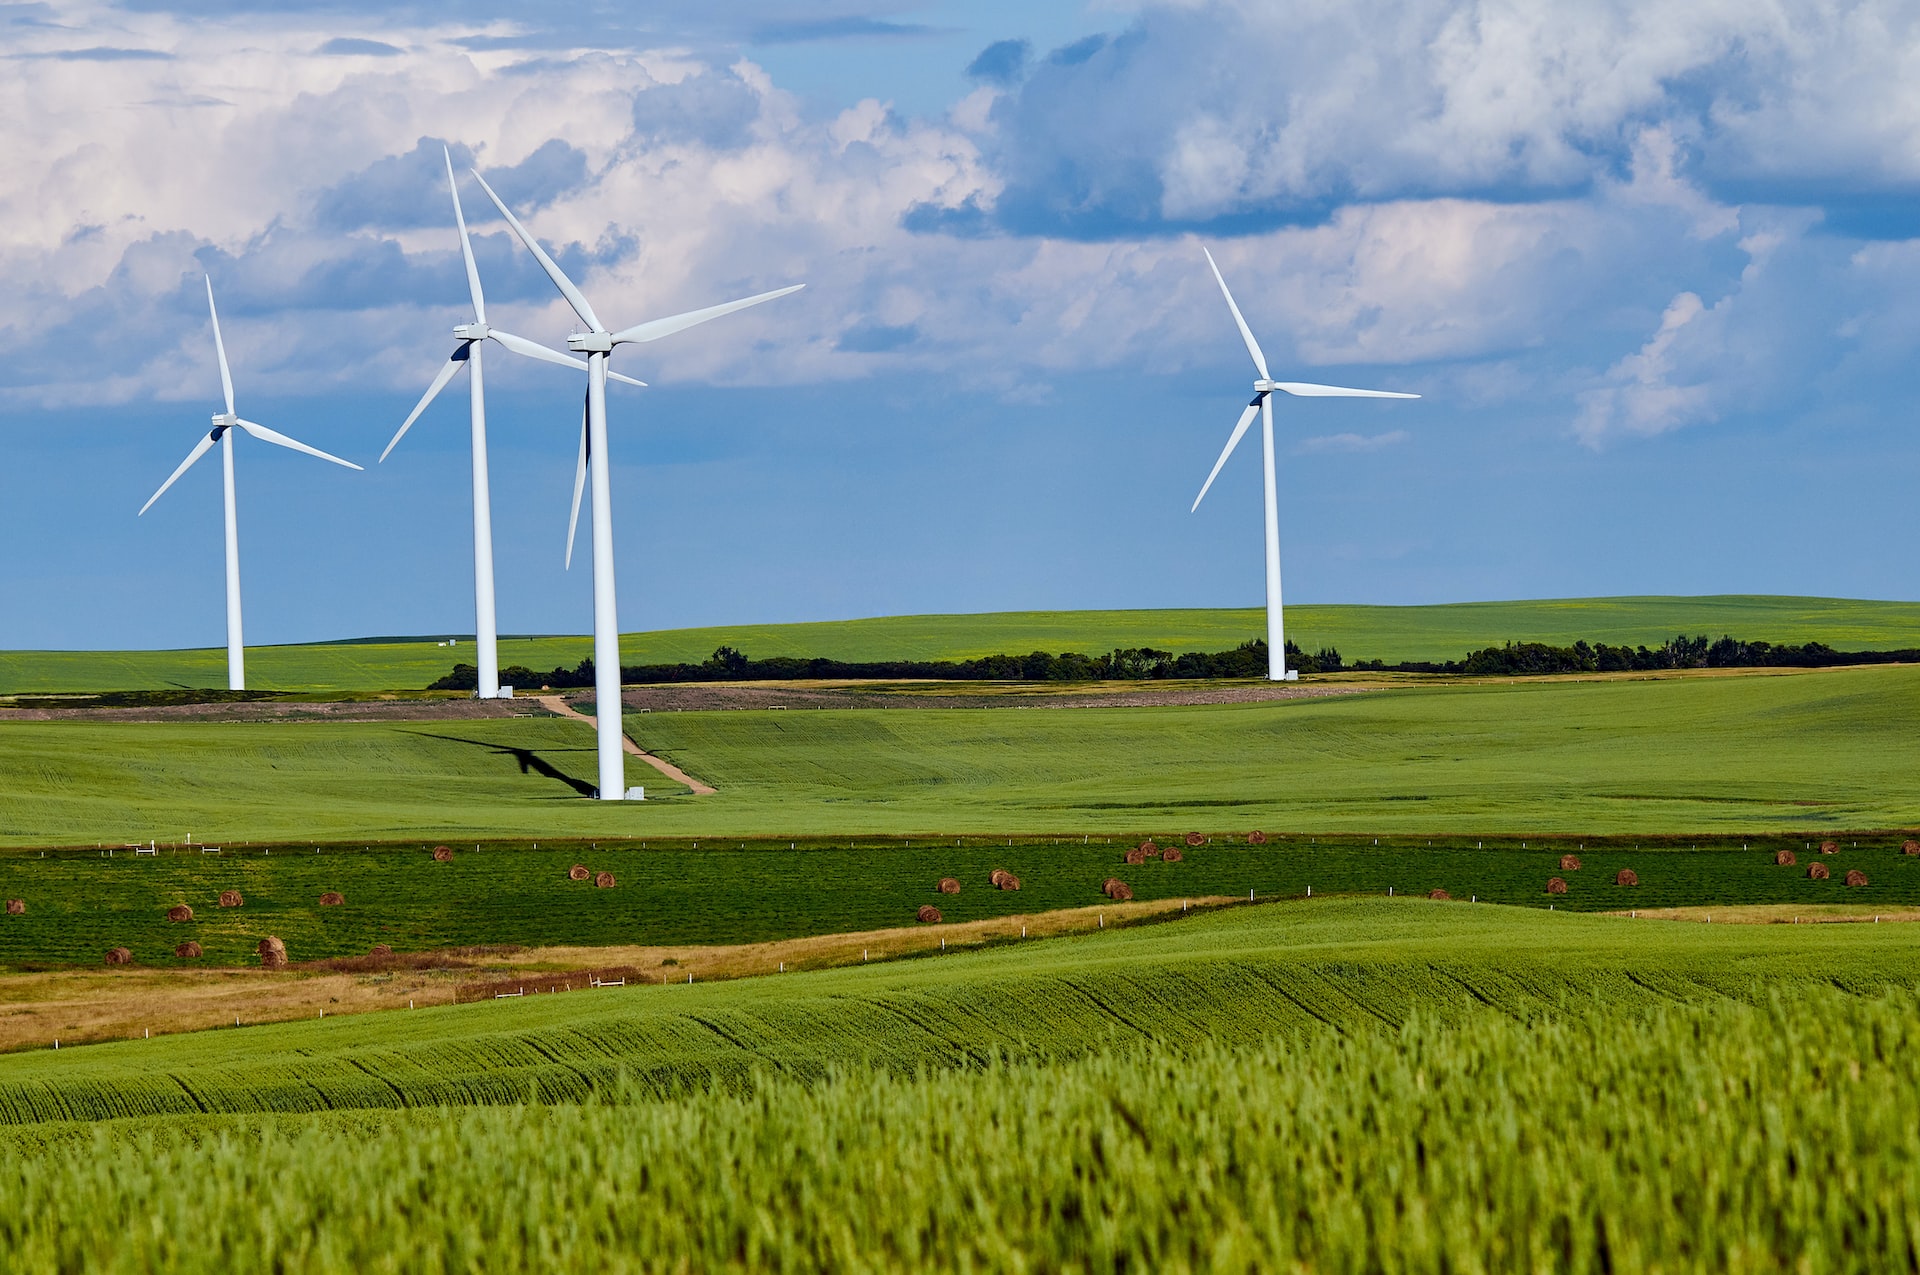 landscape of a farm with wind turbines